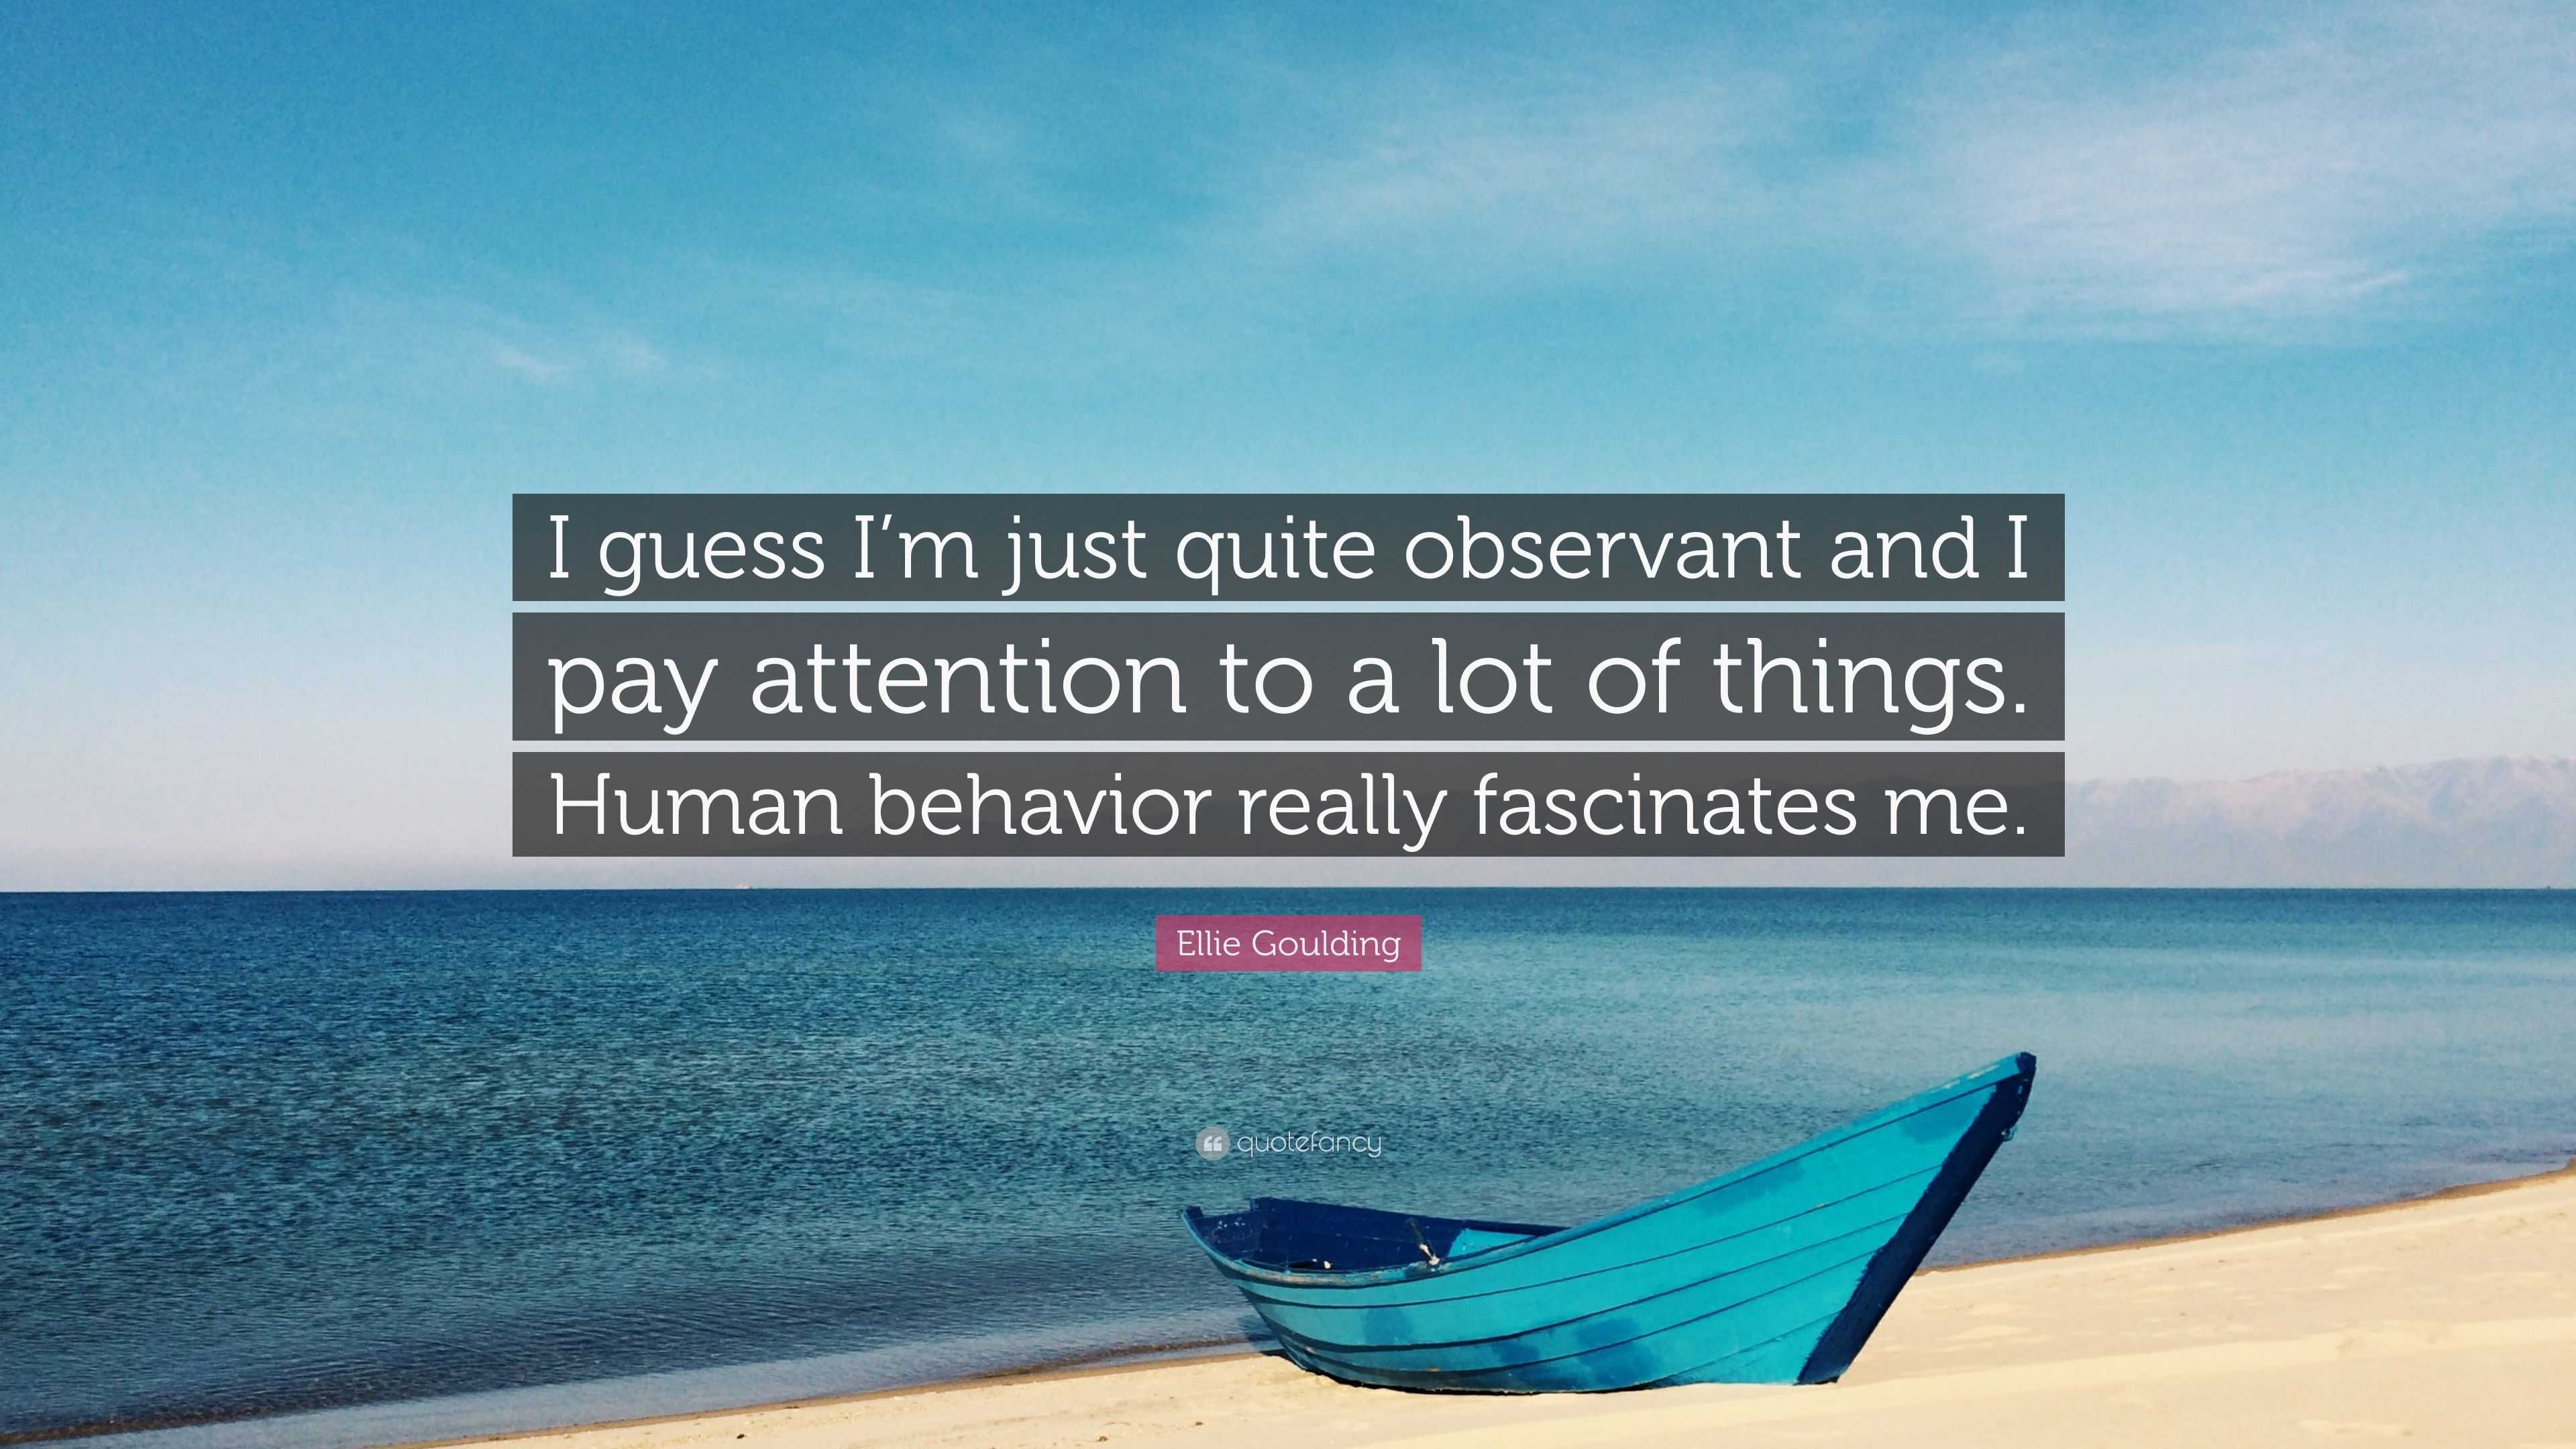 Ellie Quote: “I guess I'm quite observant and pay attention to